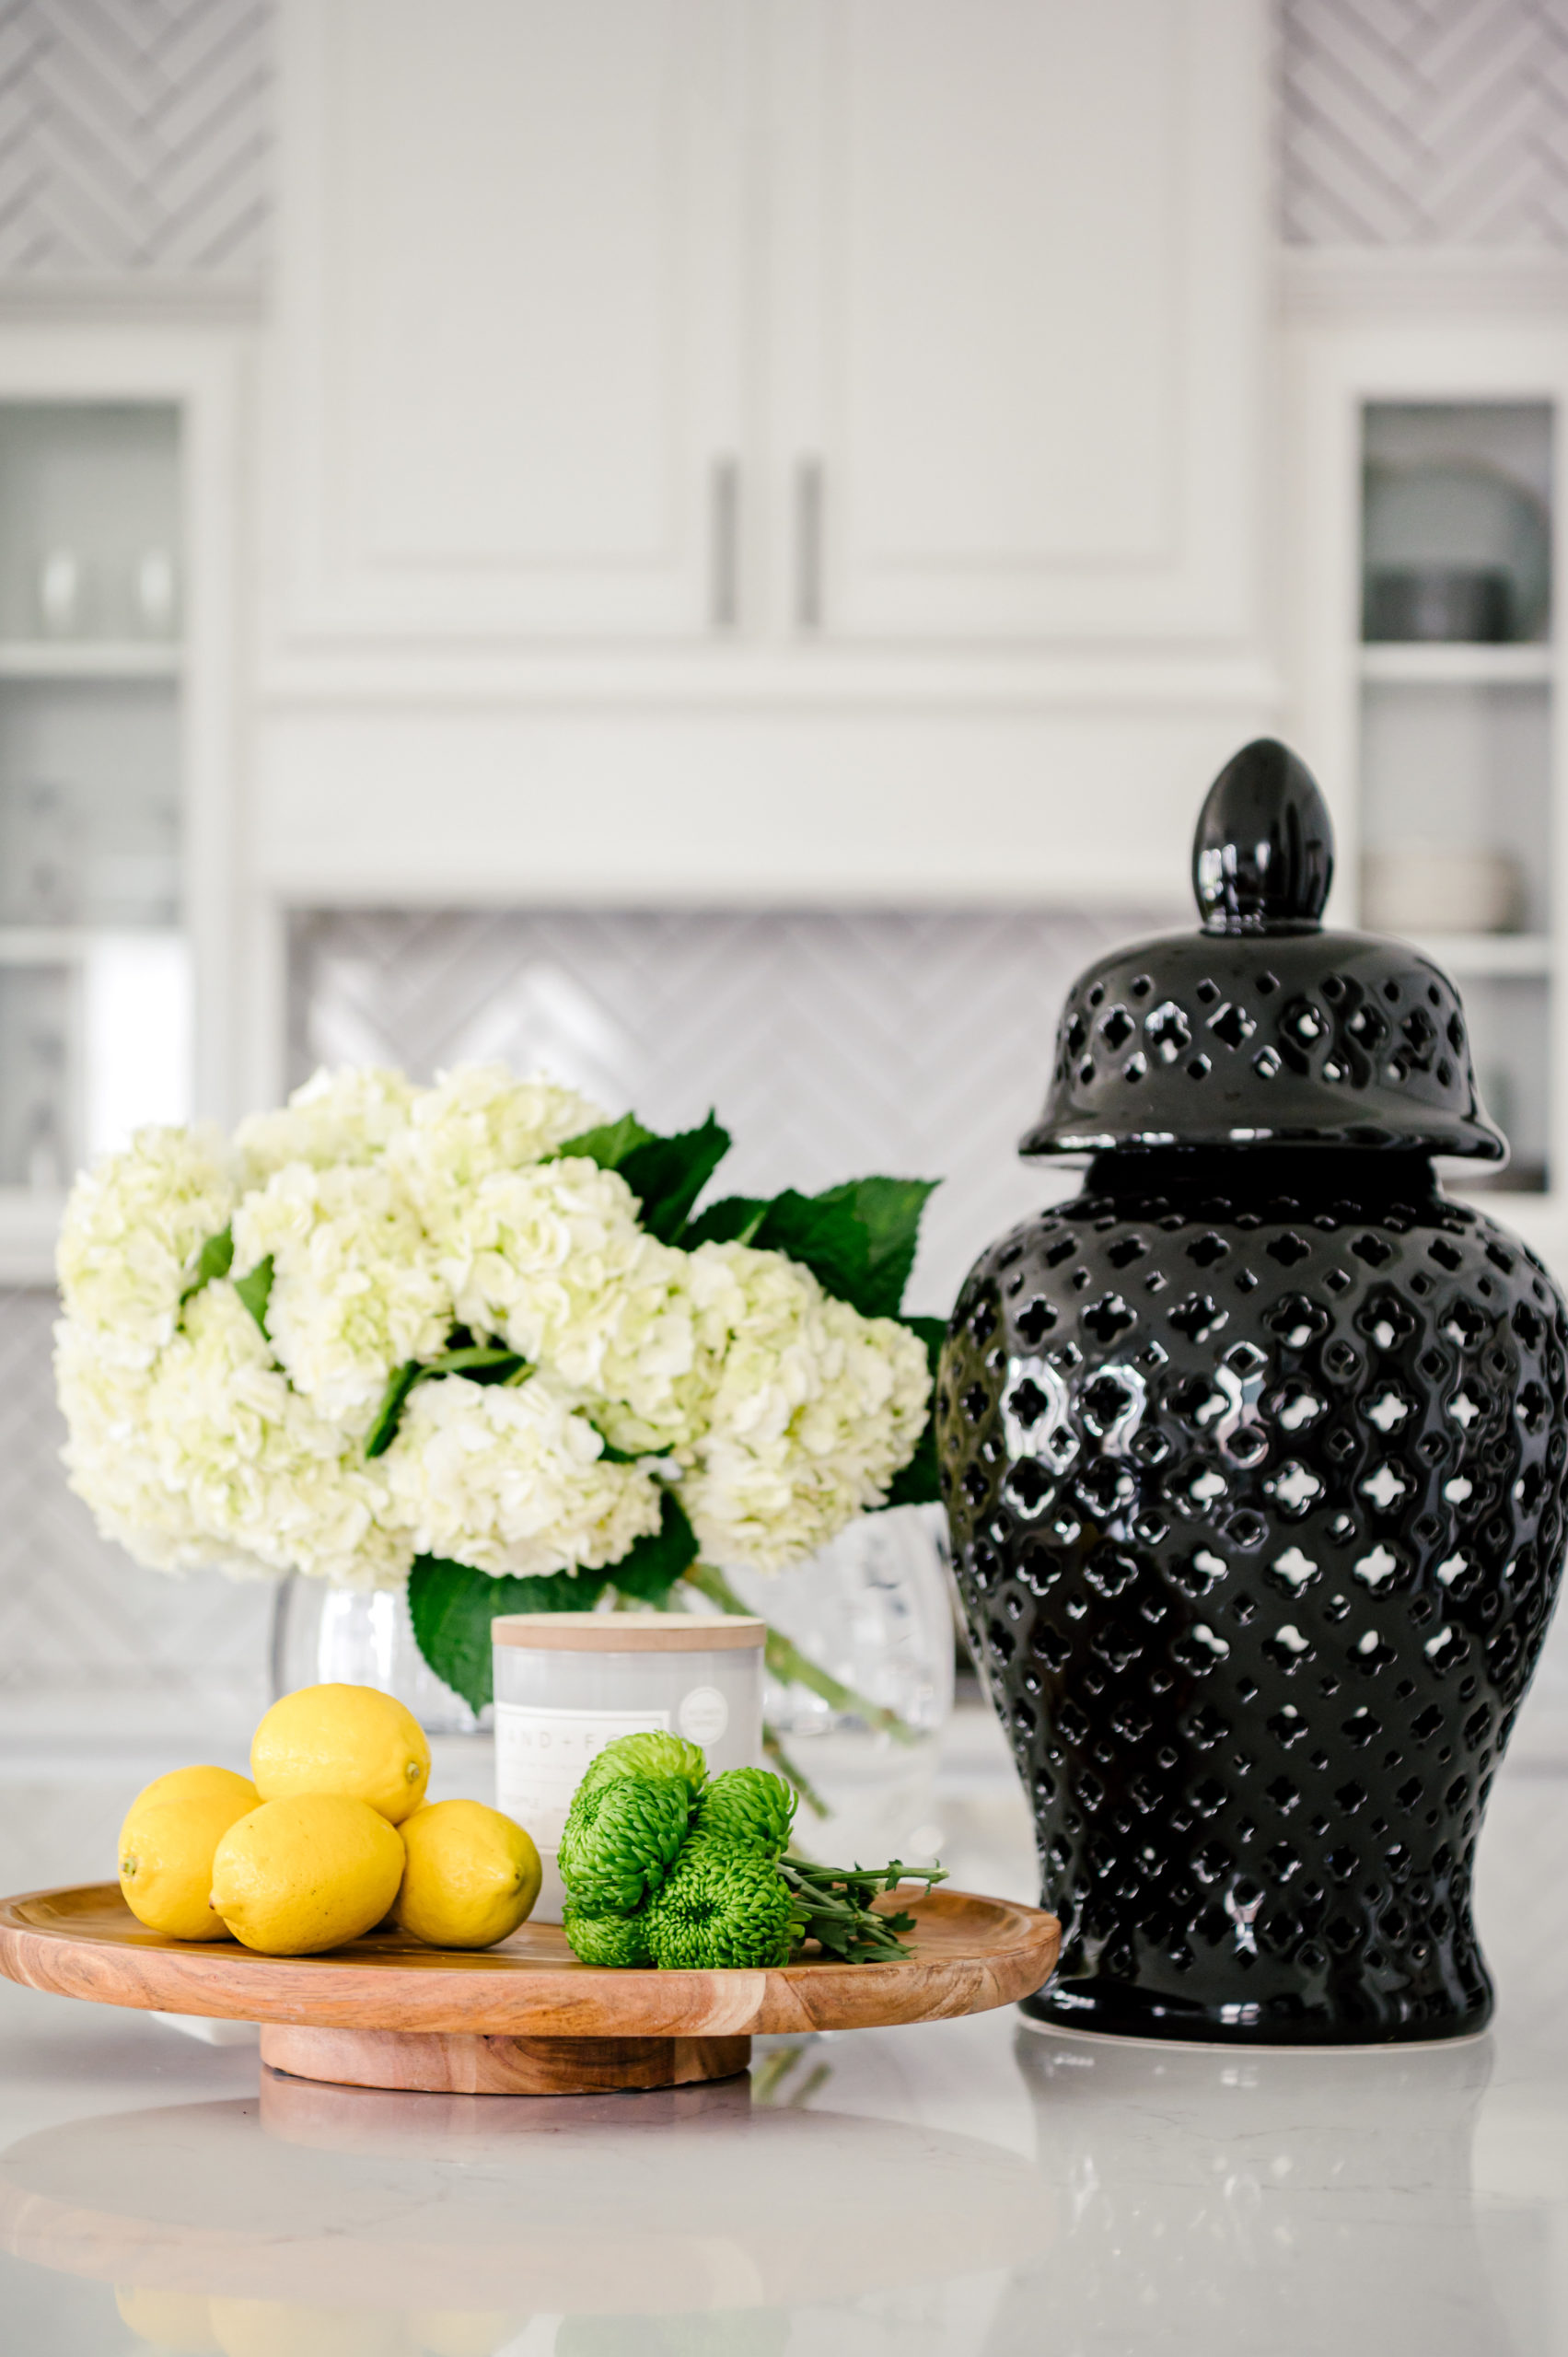 White roses in a glass vase next to a black vase and plate with lemons